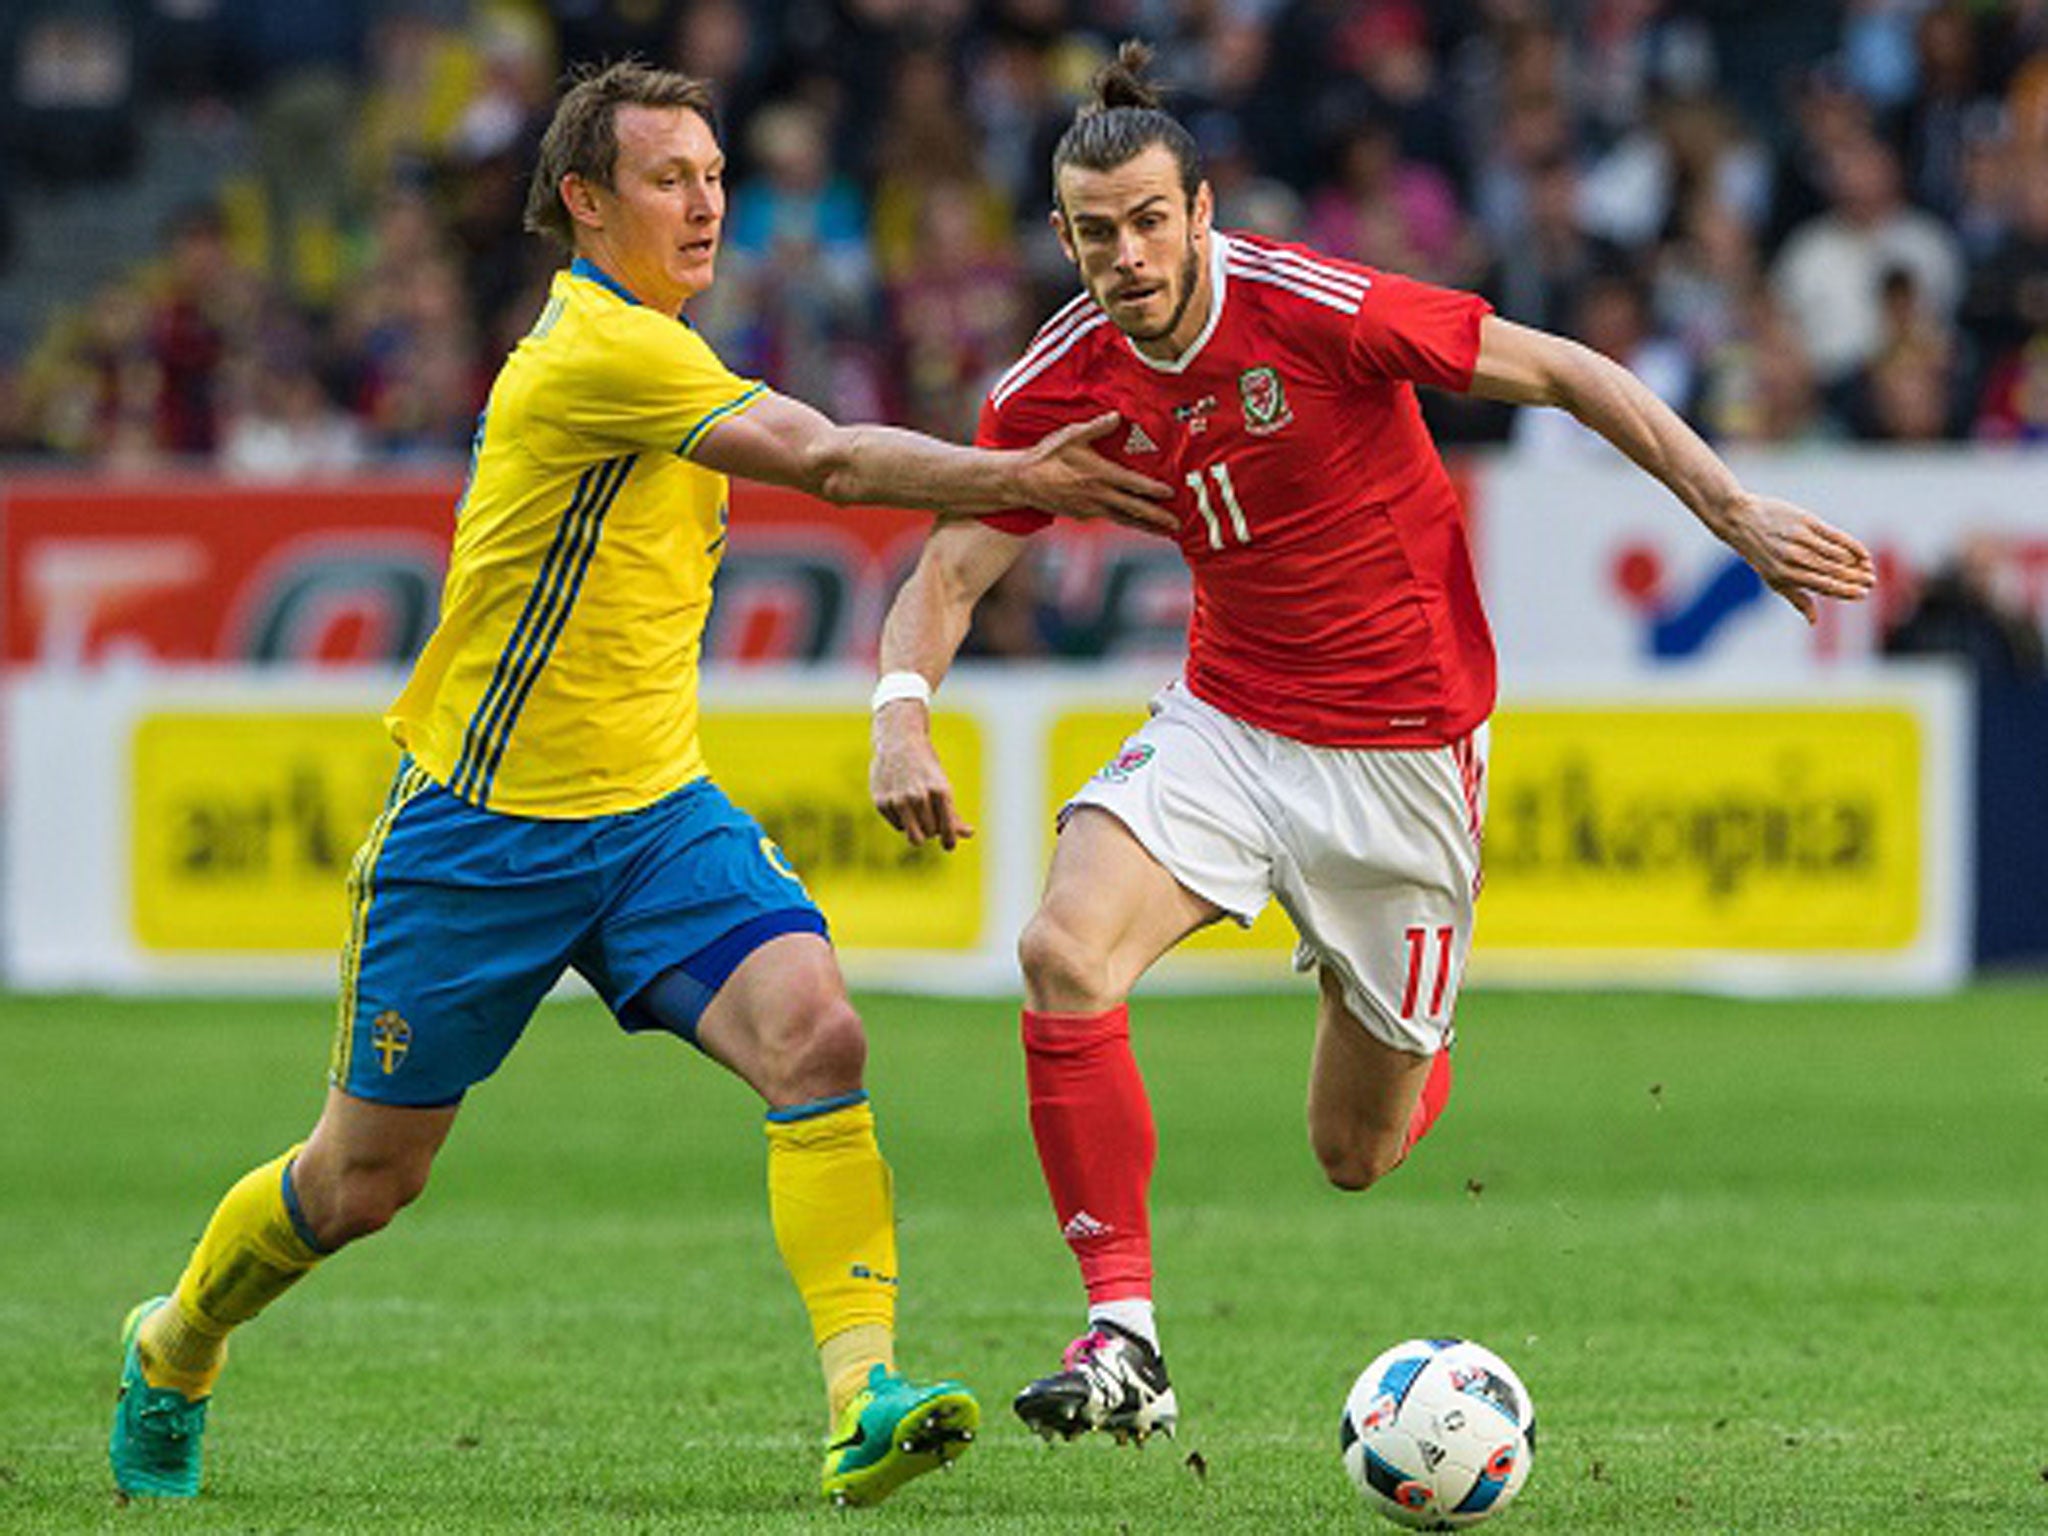 Gareth Bale will be Wales' greatest threat